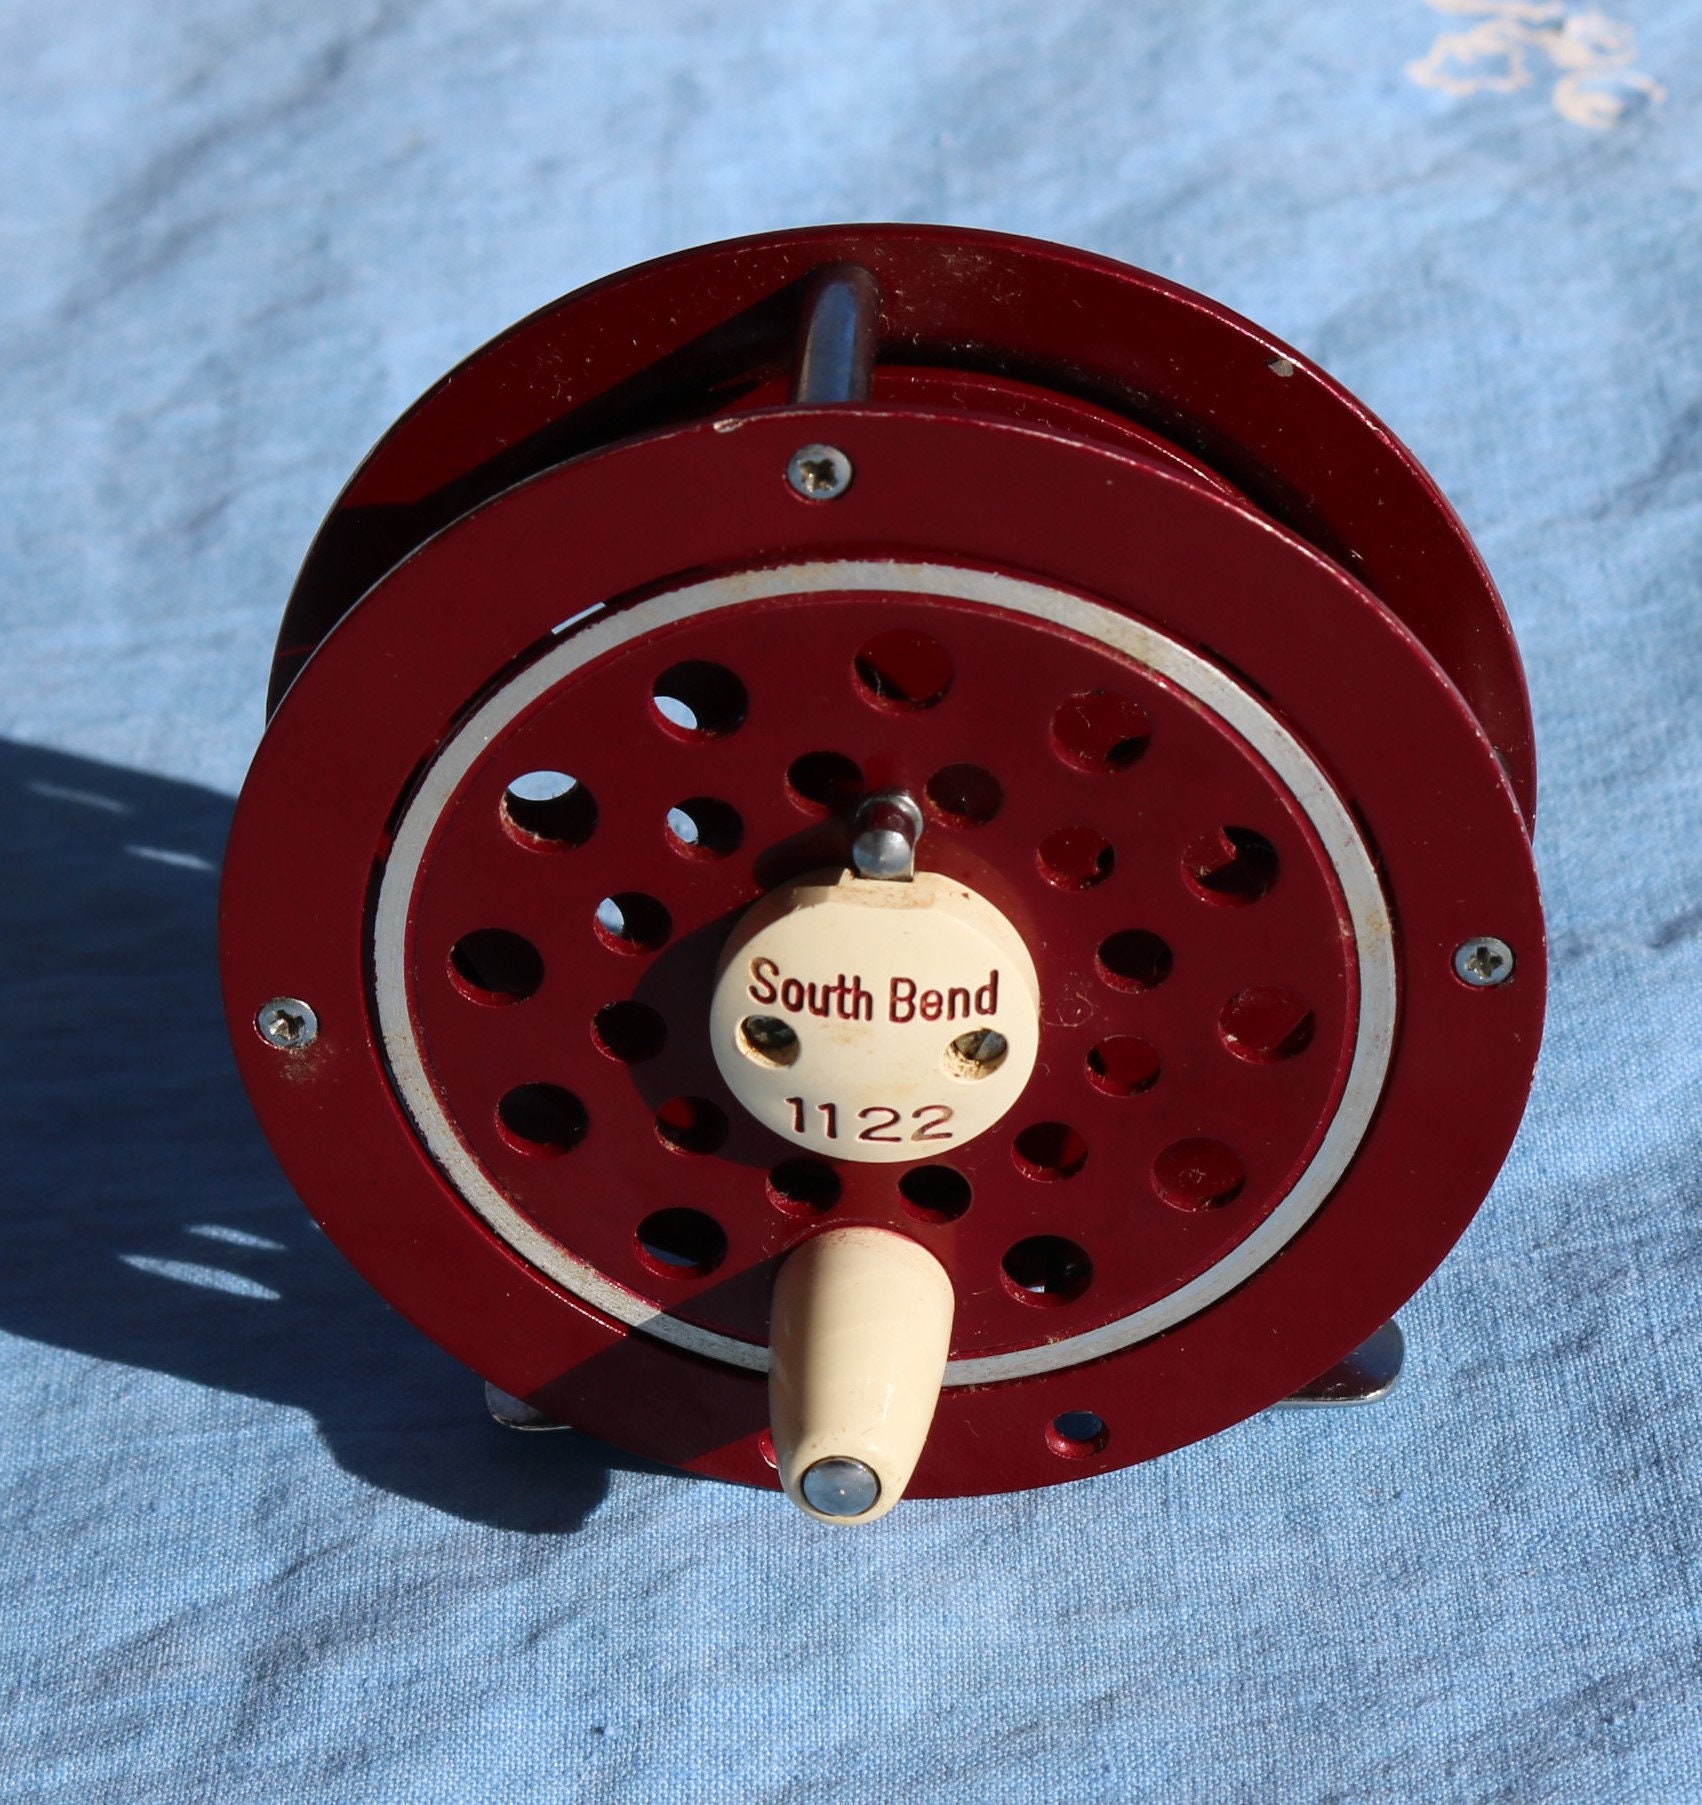 South Bend 1122 Fly Fishing Reel Very Good Condition Made in Japan